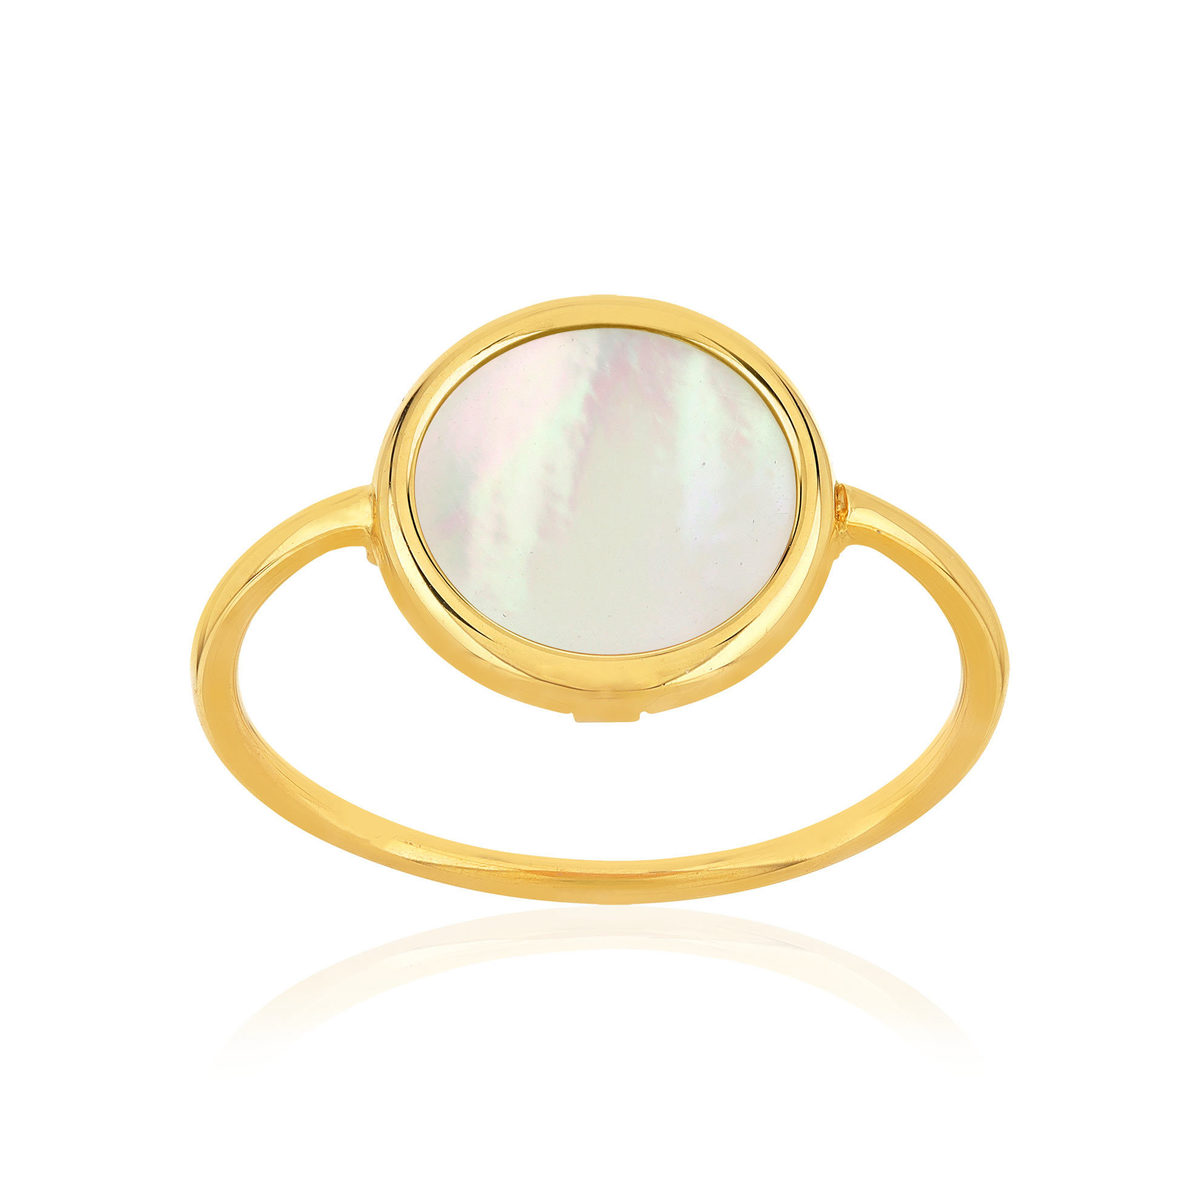 Bague or 750 jaune nacre blanche ronde.